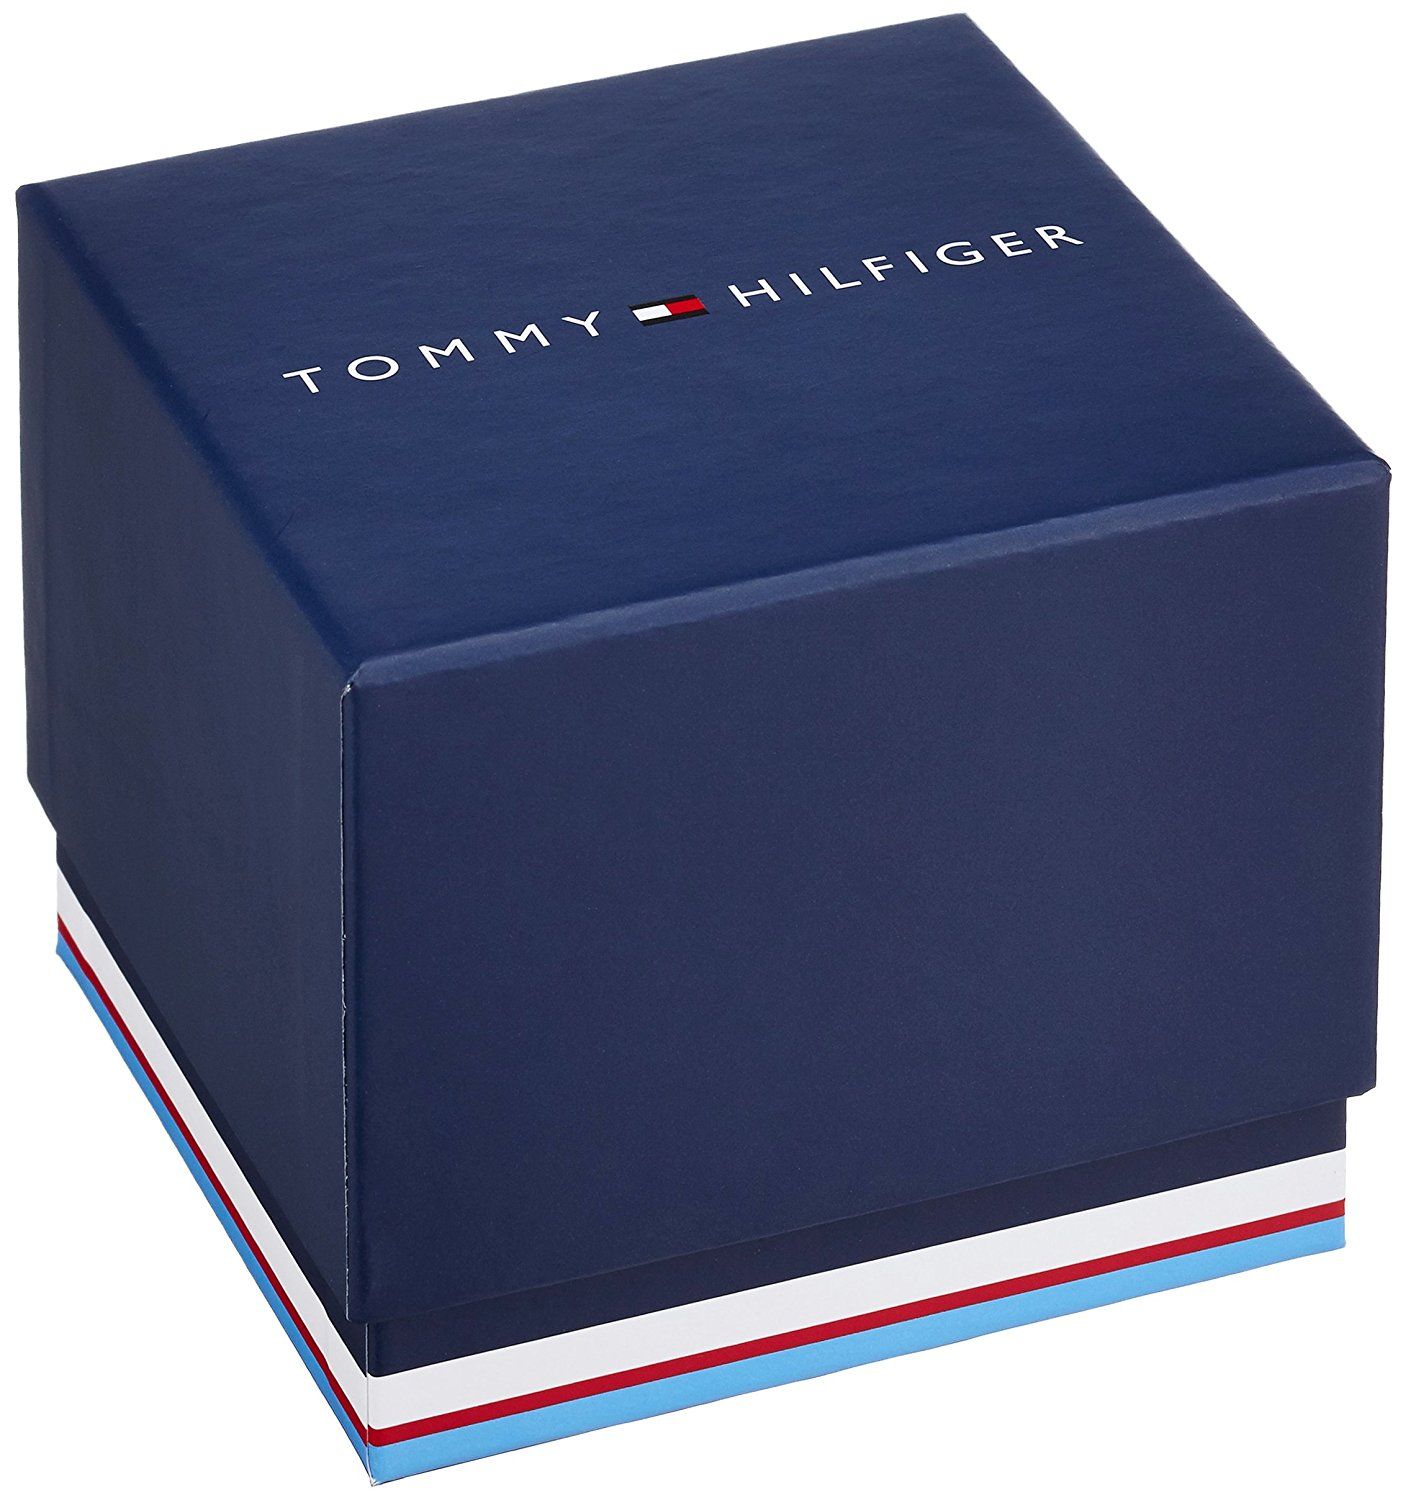 This Tommy Hilfiger Sullivan Multi Dial Watch for Men is the perfect timepiece to wear or to gift. It's Rose gold 44 mm Round case combined with the comfortable Brown Leather watch band will ensure you enjoy this stunning timepiece without any compromise. Operated by a high quality Quartz movement and water resistant to 5 bars, your watch will keep ticking. Get all the comfort with this fashionable croco-embossed leather band, perfect for every occasion  -The watch has a calendar function: Day-Date, 24-hour Display High quality 21 cm length and 21 mm width Brown Leather strap with a Buckle Case diameter: 44 mm,case thickness: 10 mm, case colour: Rose Gold and dial colour: Blue